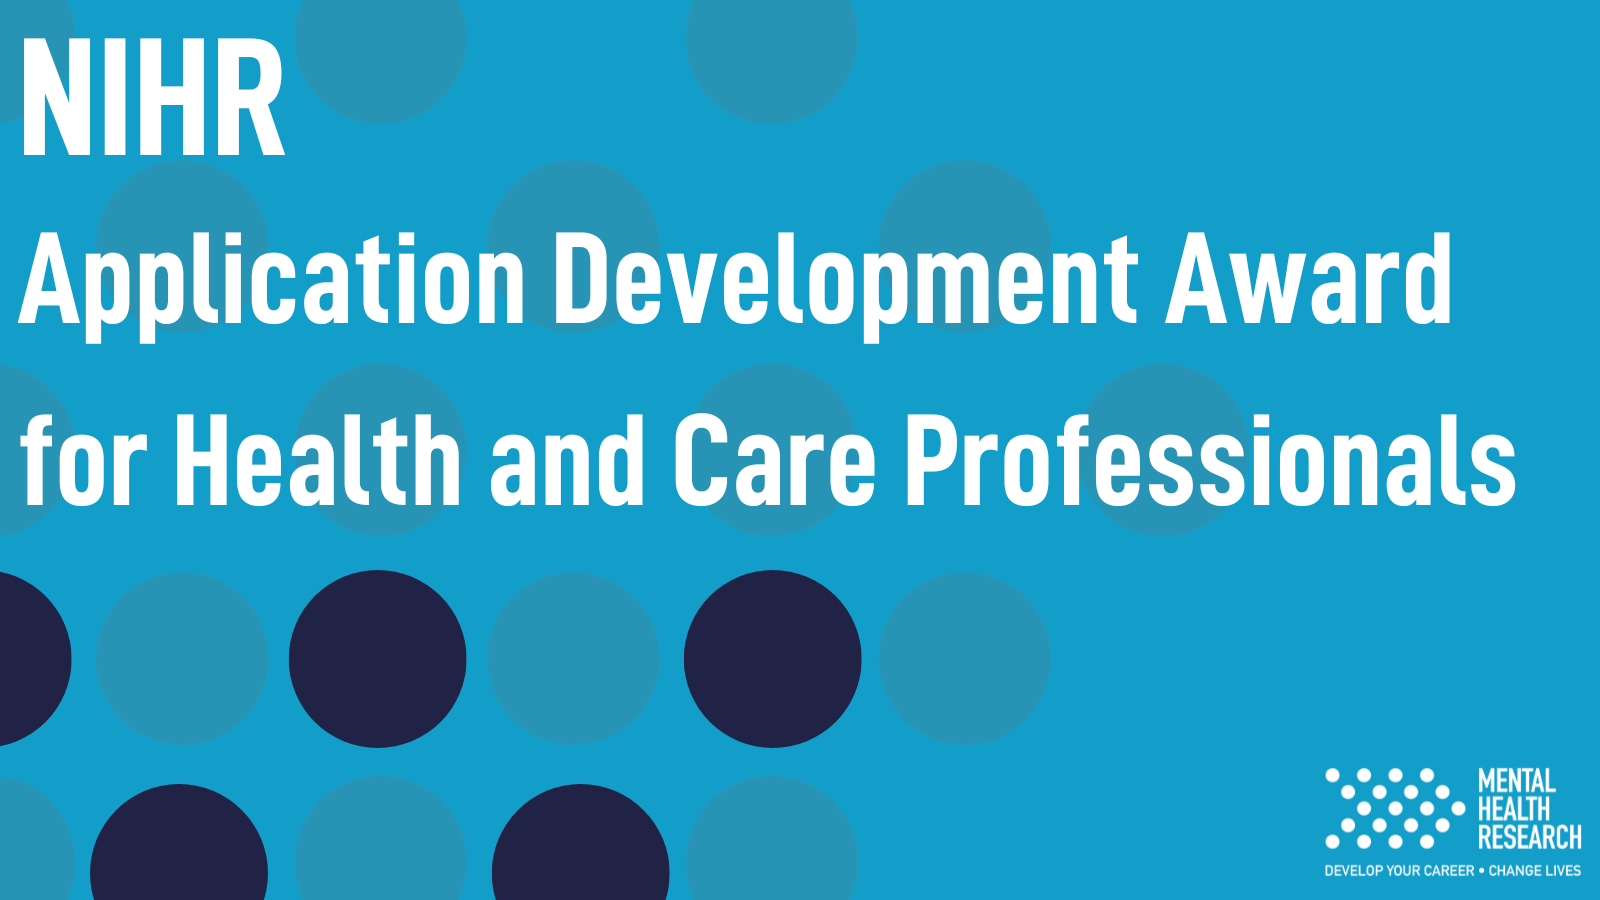 Application Development Award for Health and Care Professionals